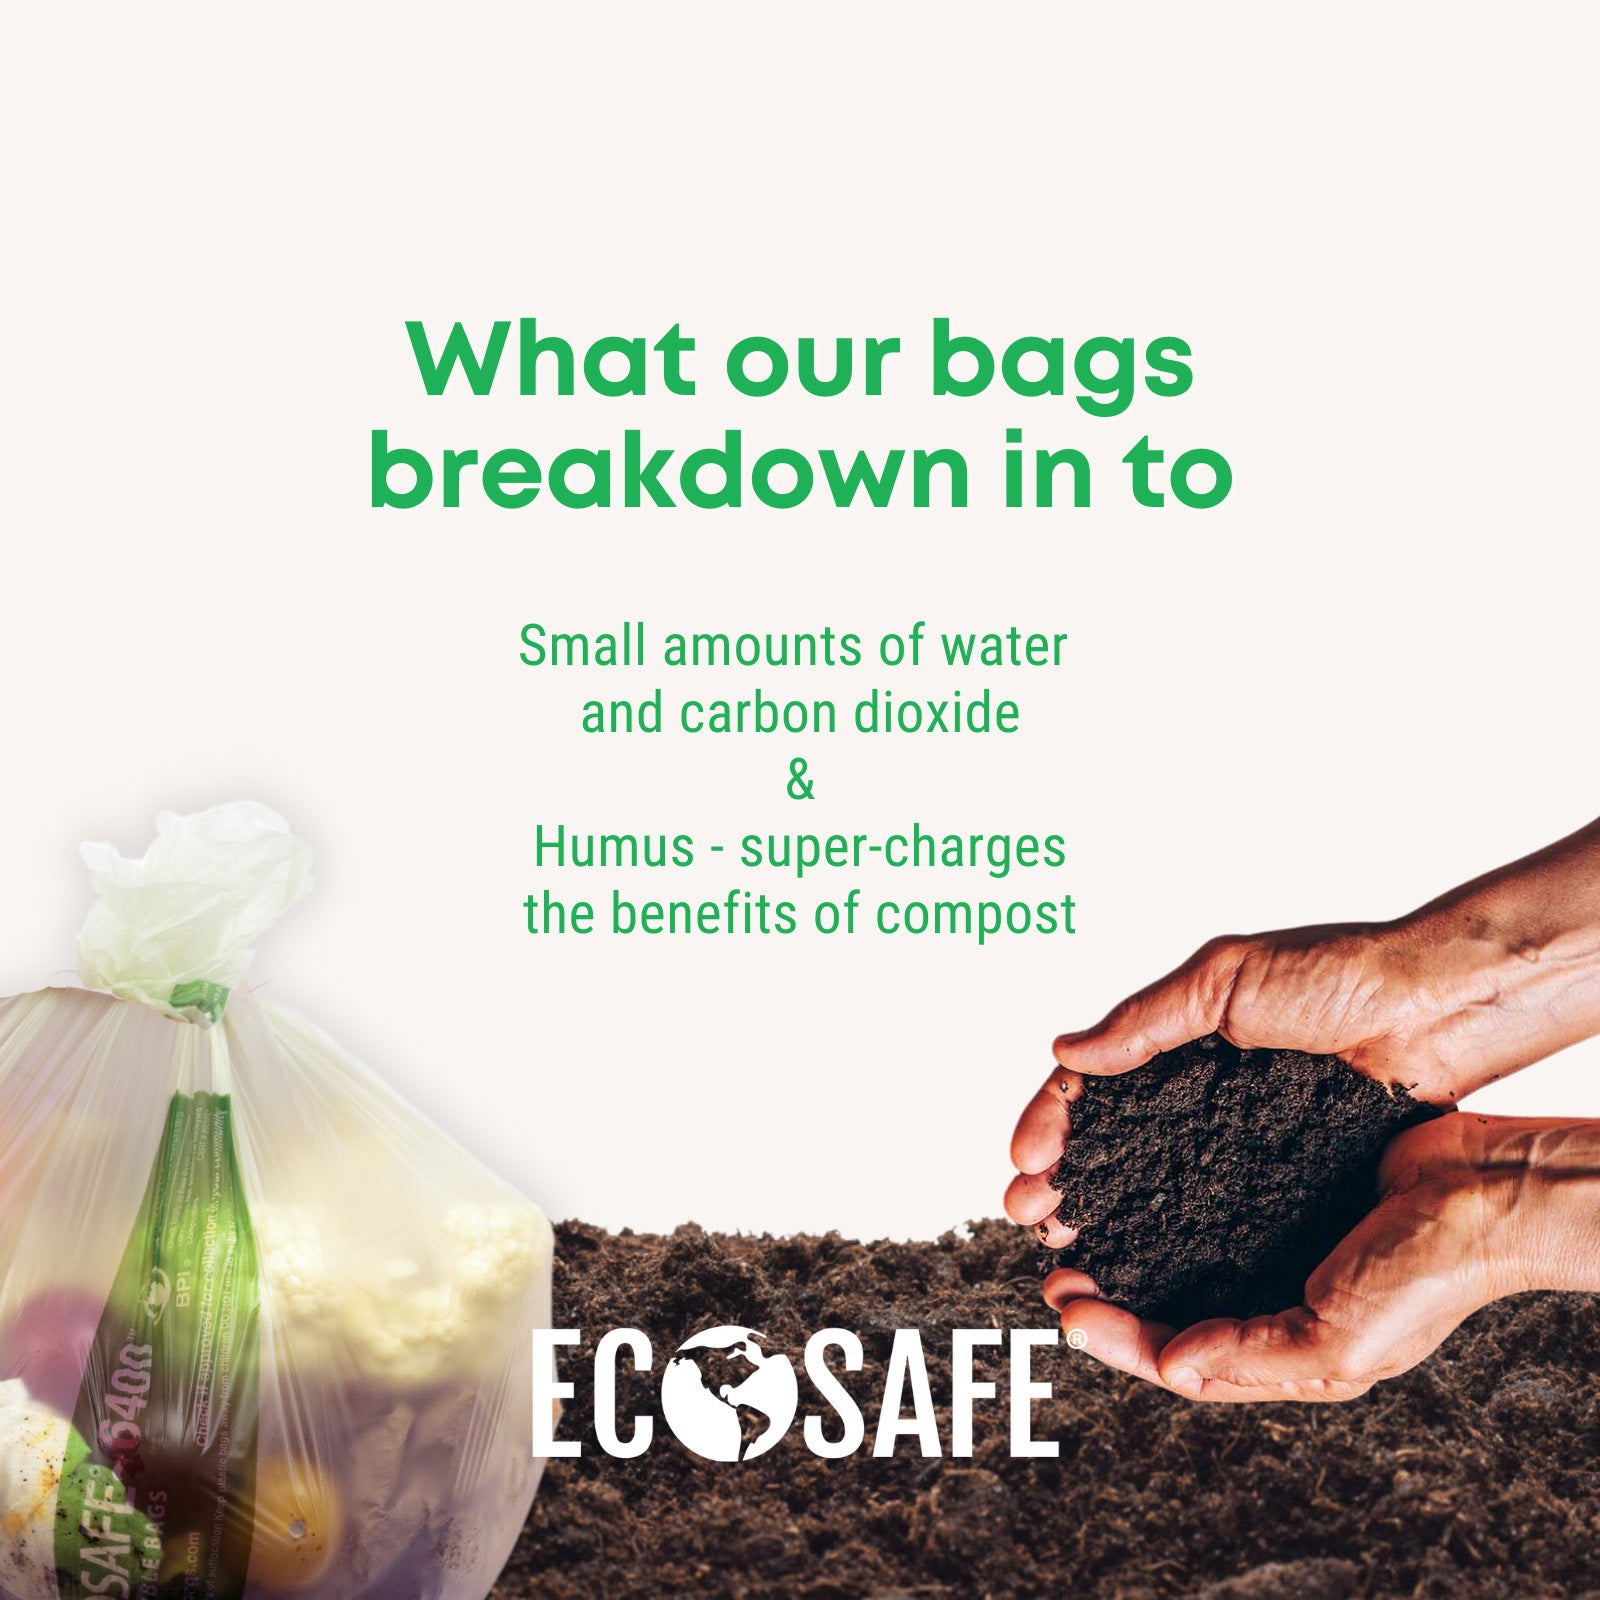 ECOSLO - Garbage bags don't belong in the recycling bin! Happy ECO